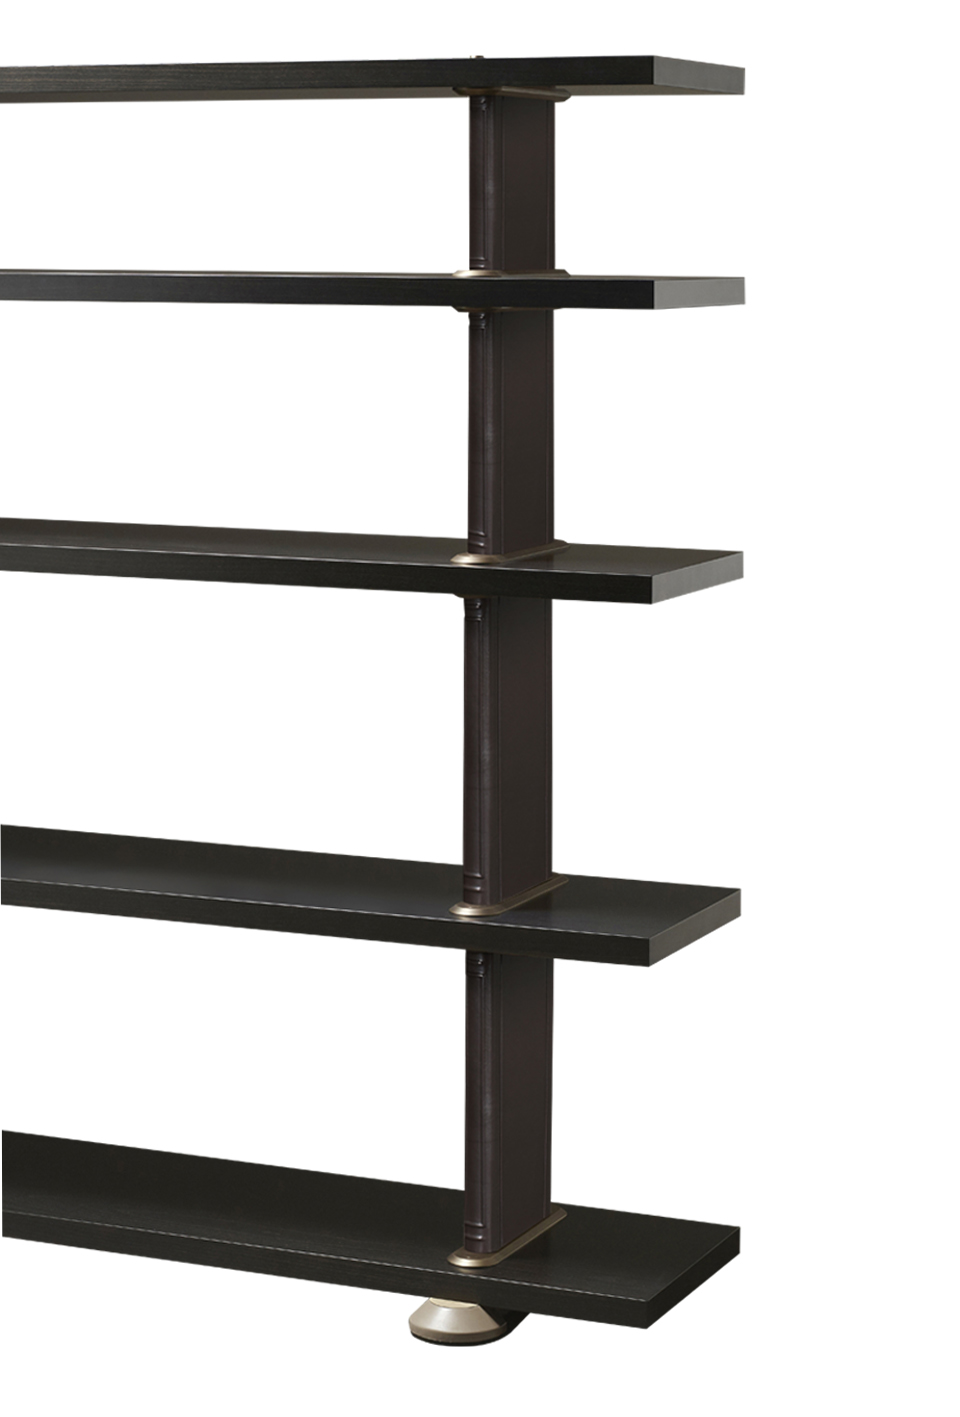 Peggy is a modular wooden bookcase with leather covered supports and bronze details, from Promemoria's catalogue | Promemoria